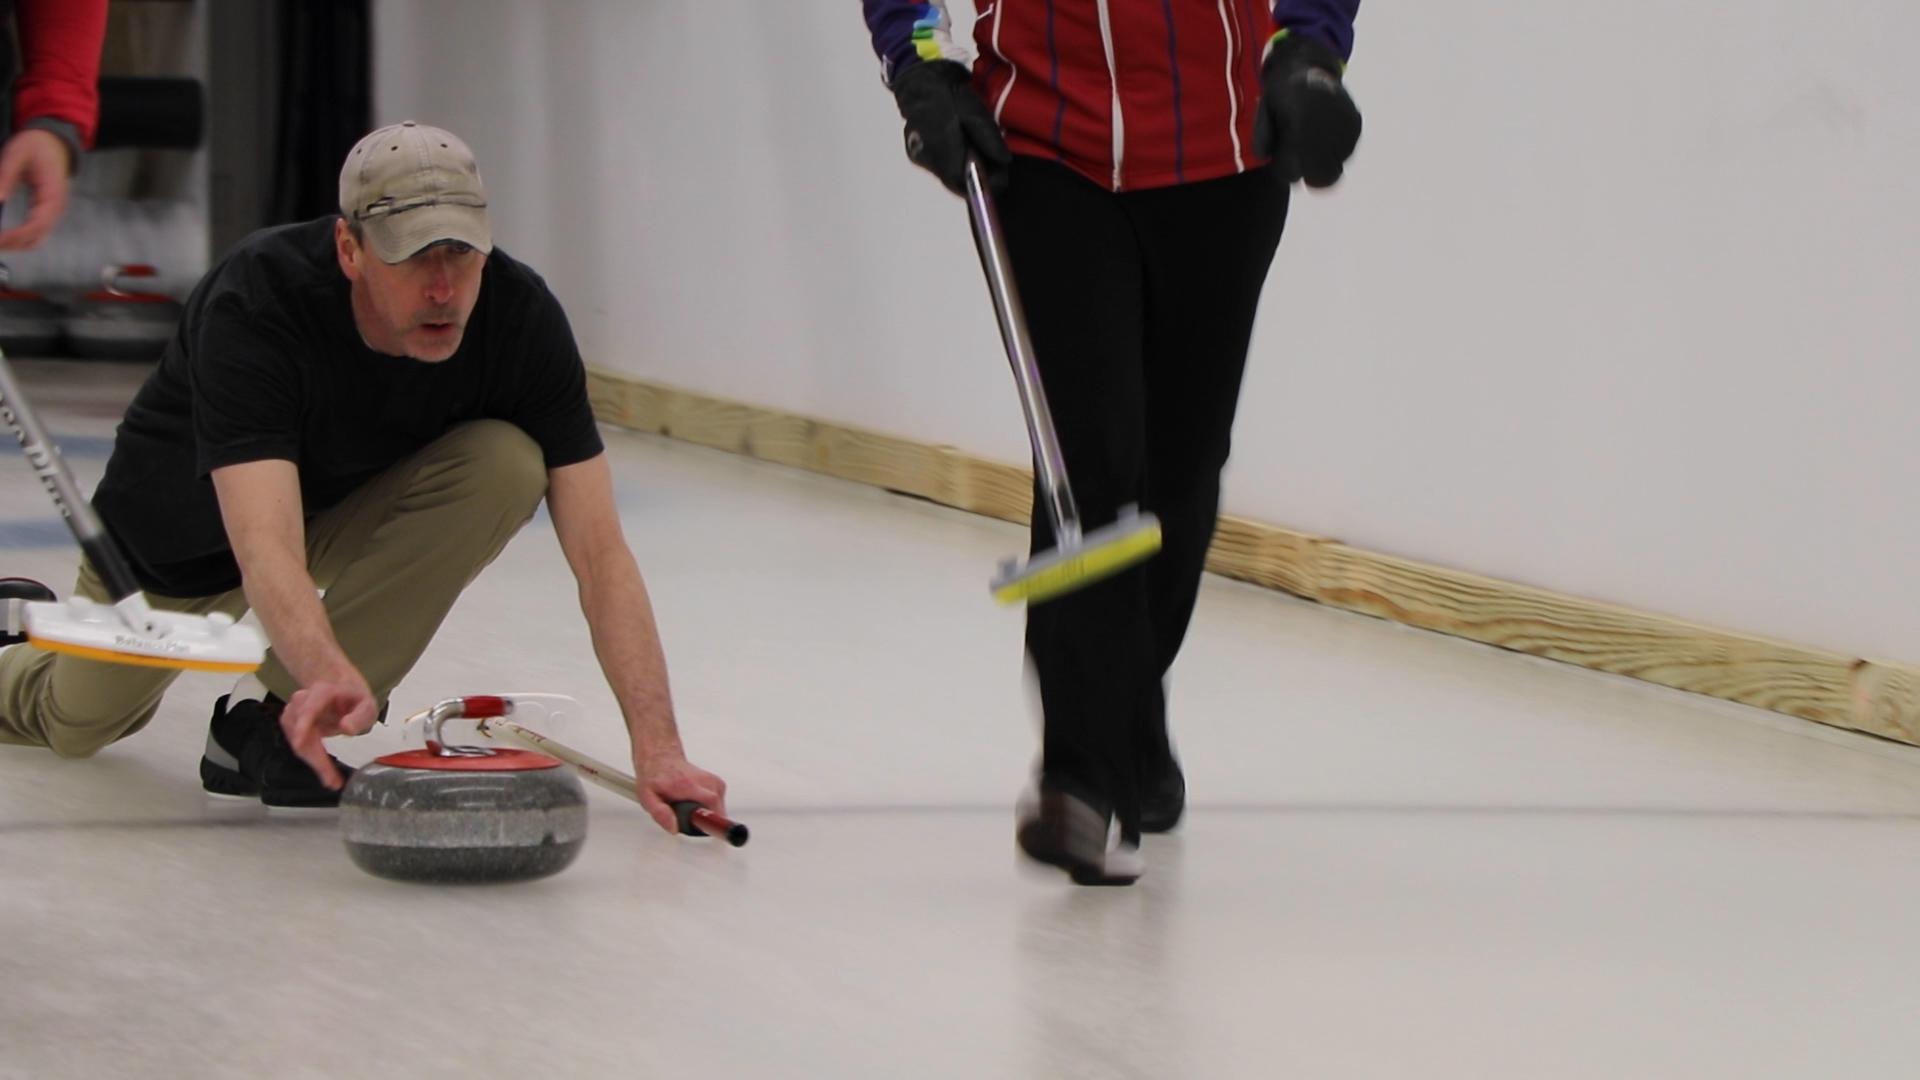 A shooter sends the 42-pound granite curling stone down the sheet of ice. (Evan Garcia / WTTW News)